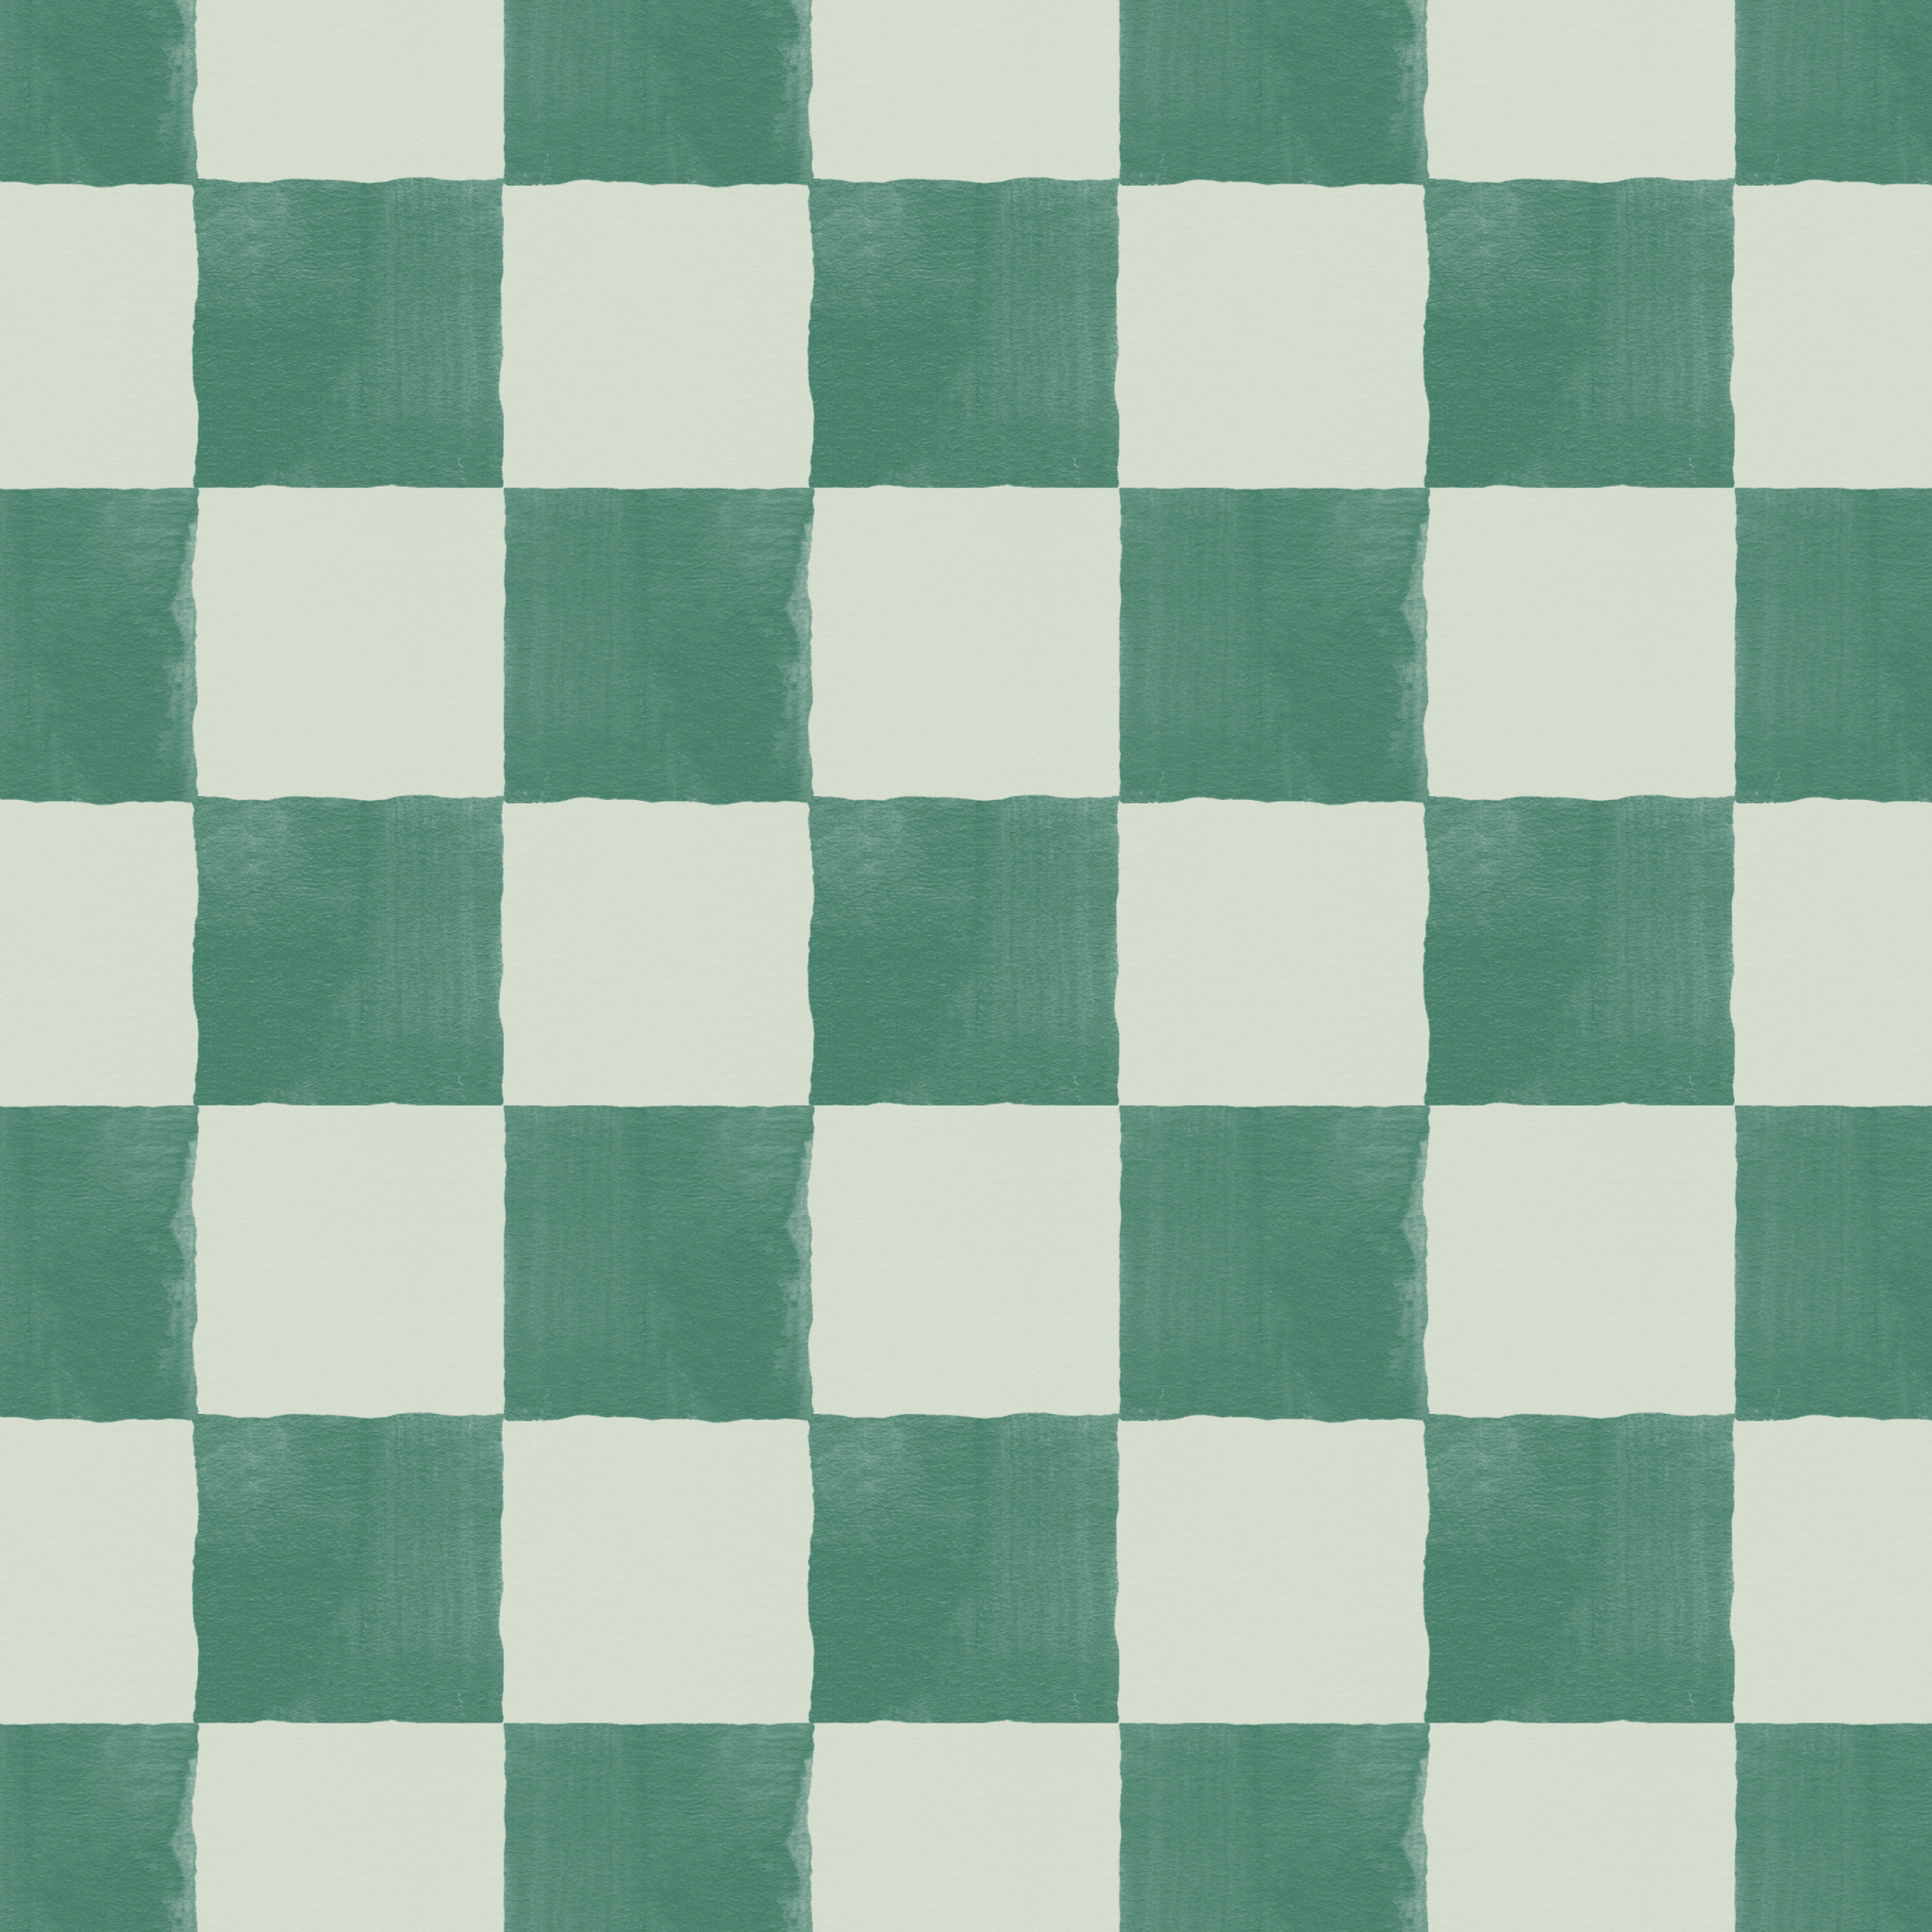 Decorative checkered pattern with alternating sage green and off-white squares, textured wallpaper design